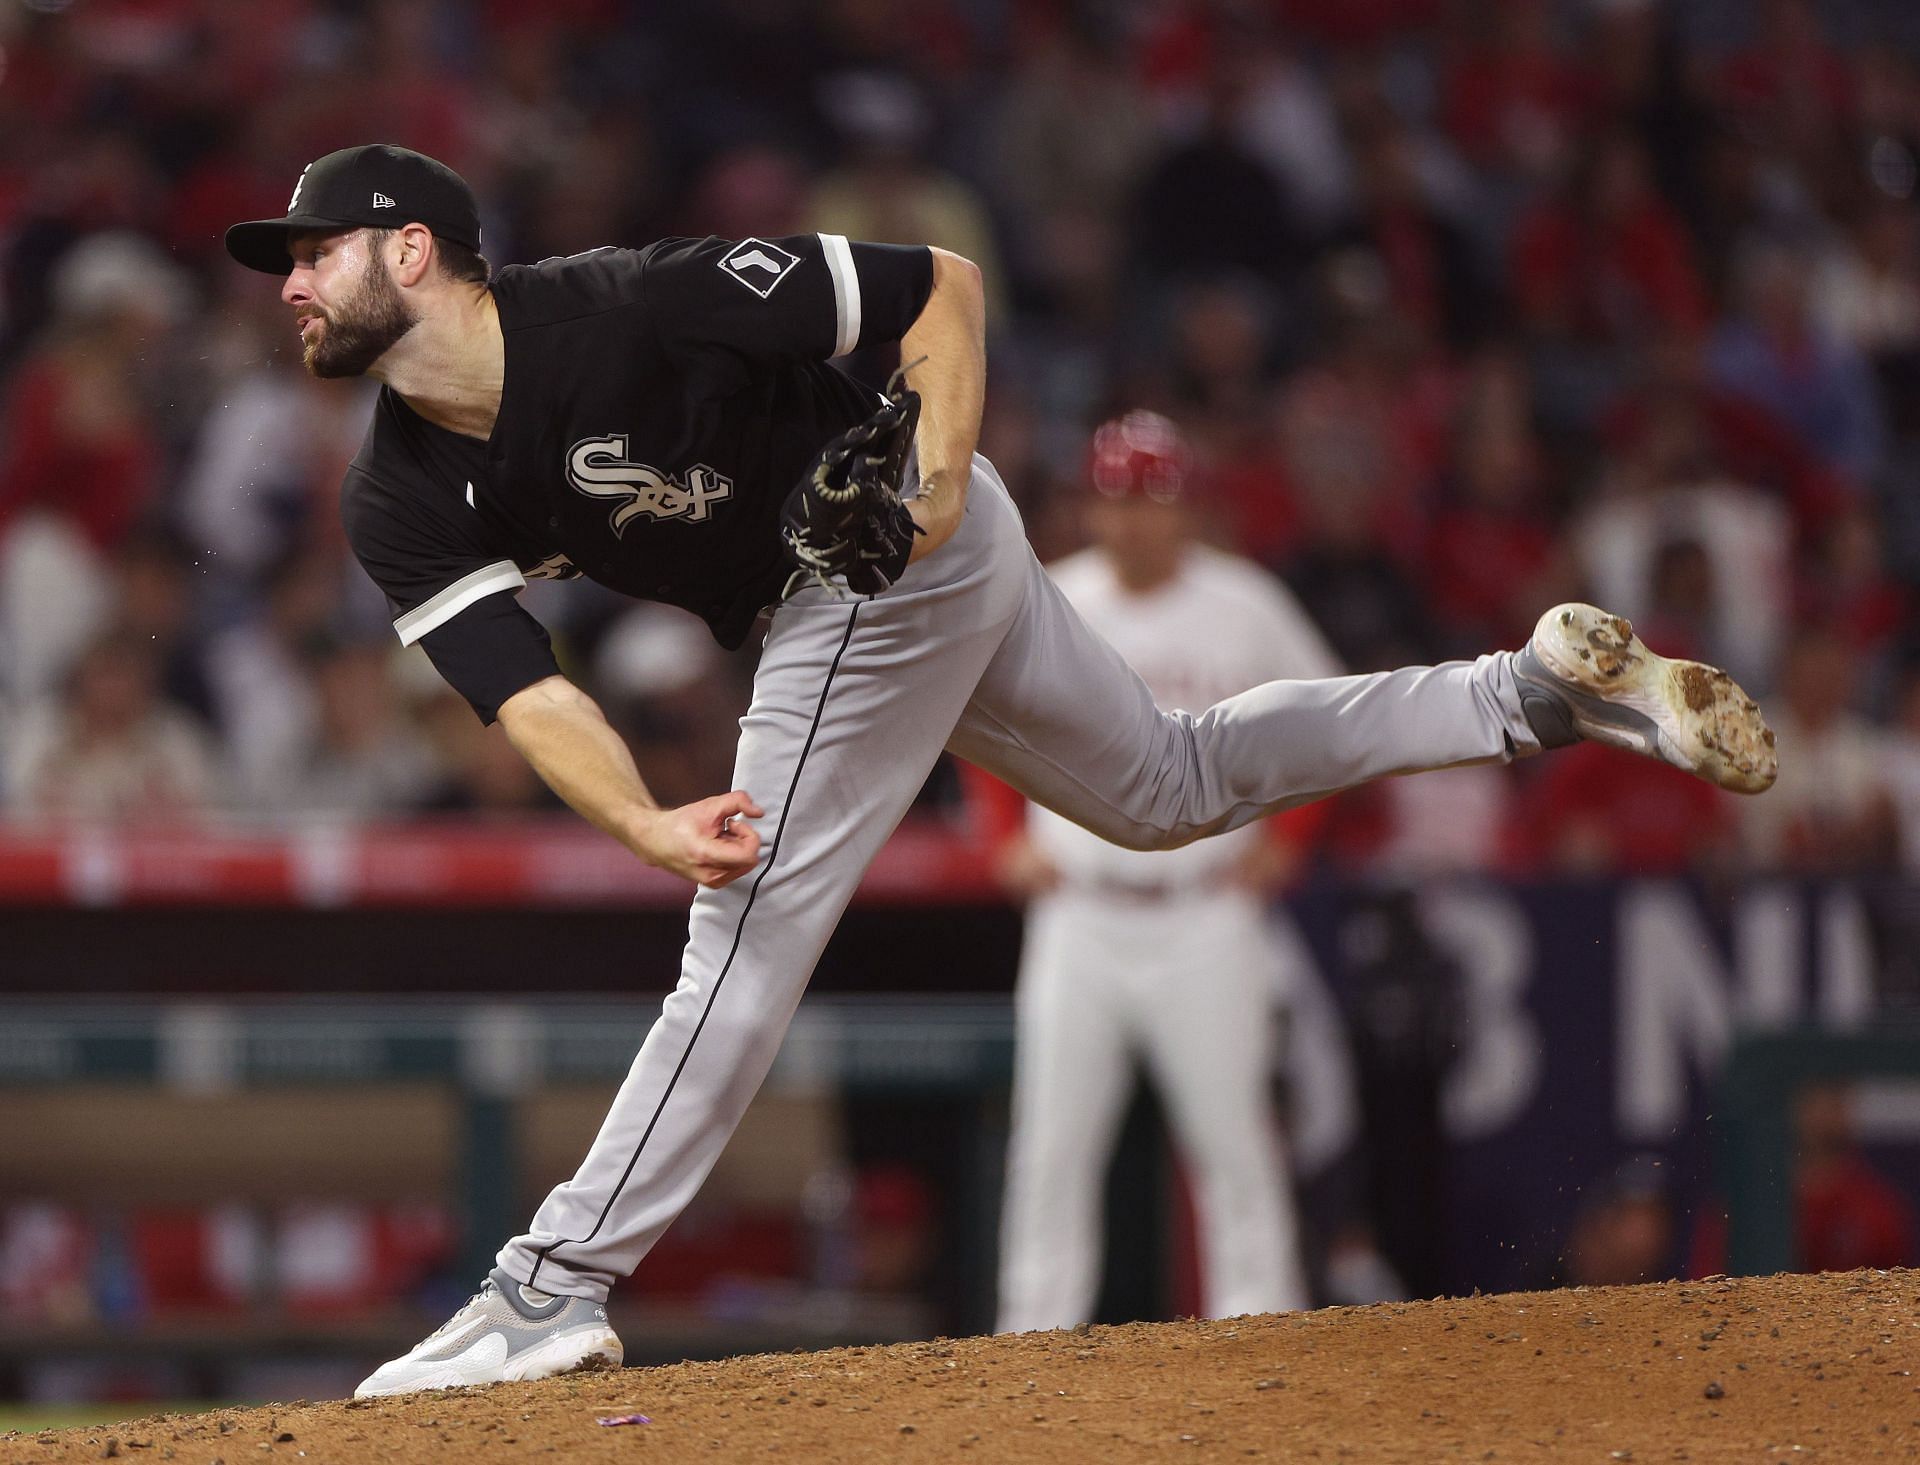 Giolito has shown flashes of becoming an ace and is at odds for a contract extension.